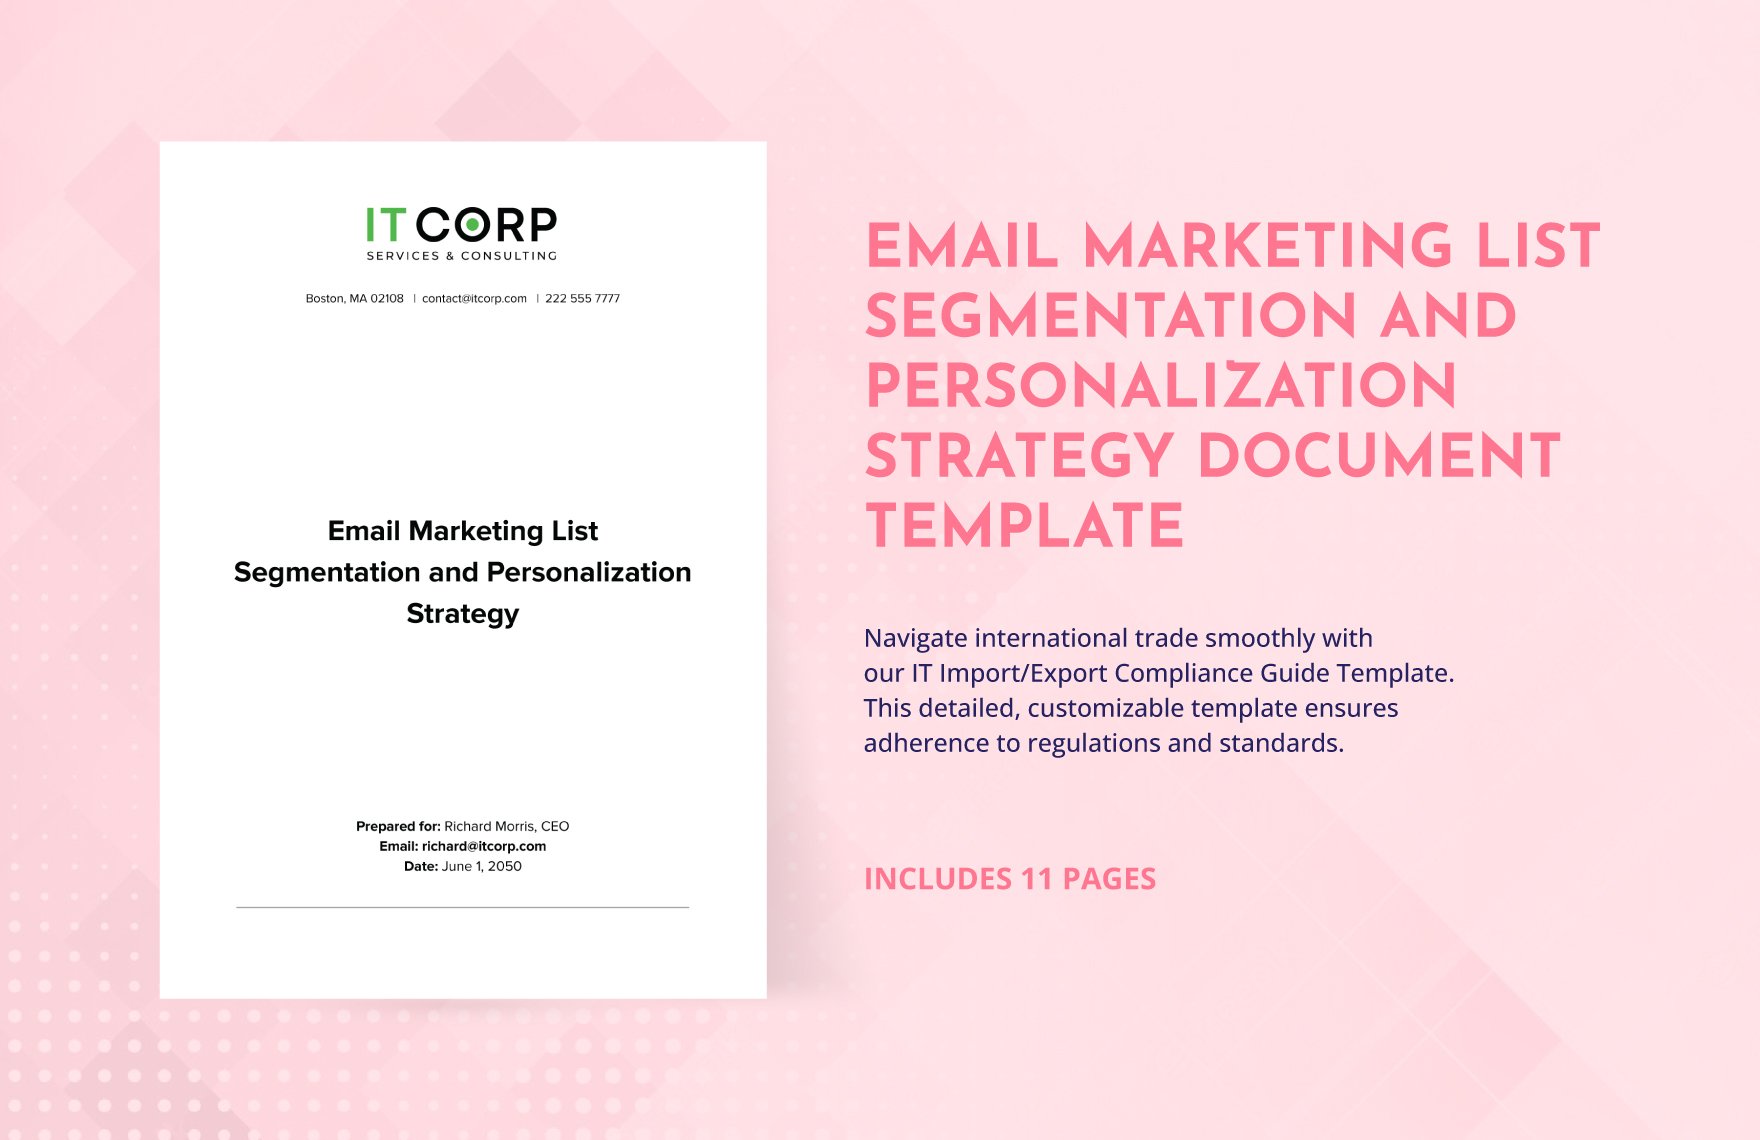 Email Marketing List Segmentation and Personalization Strategy Document Template